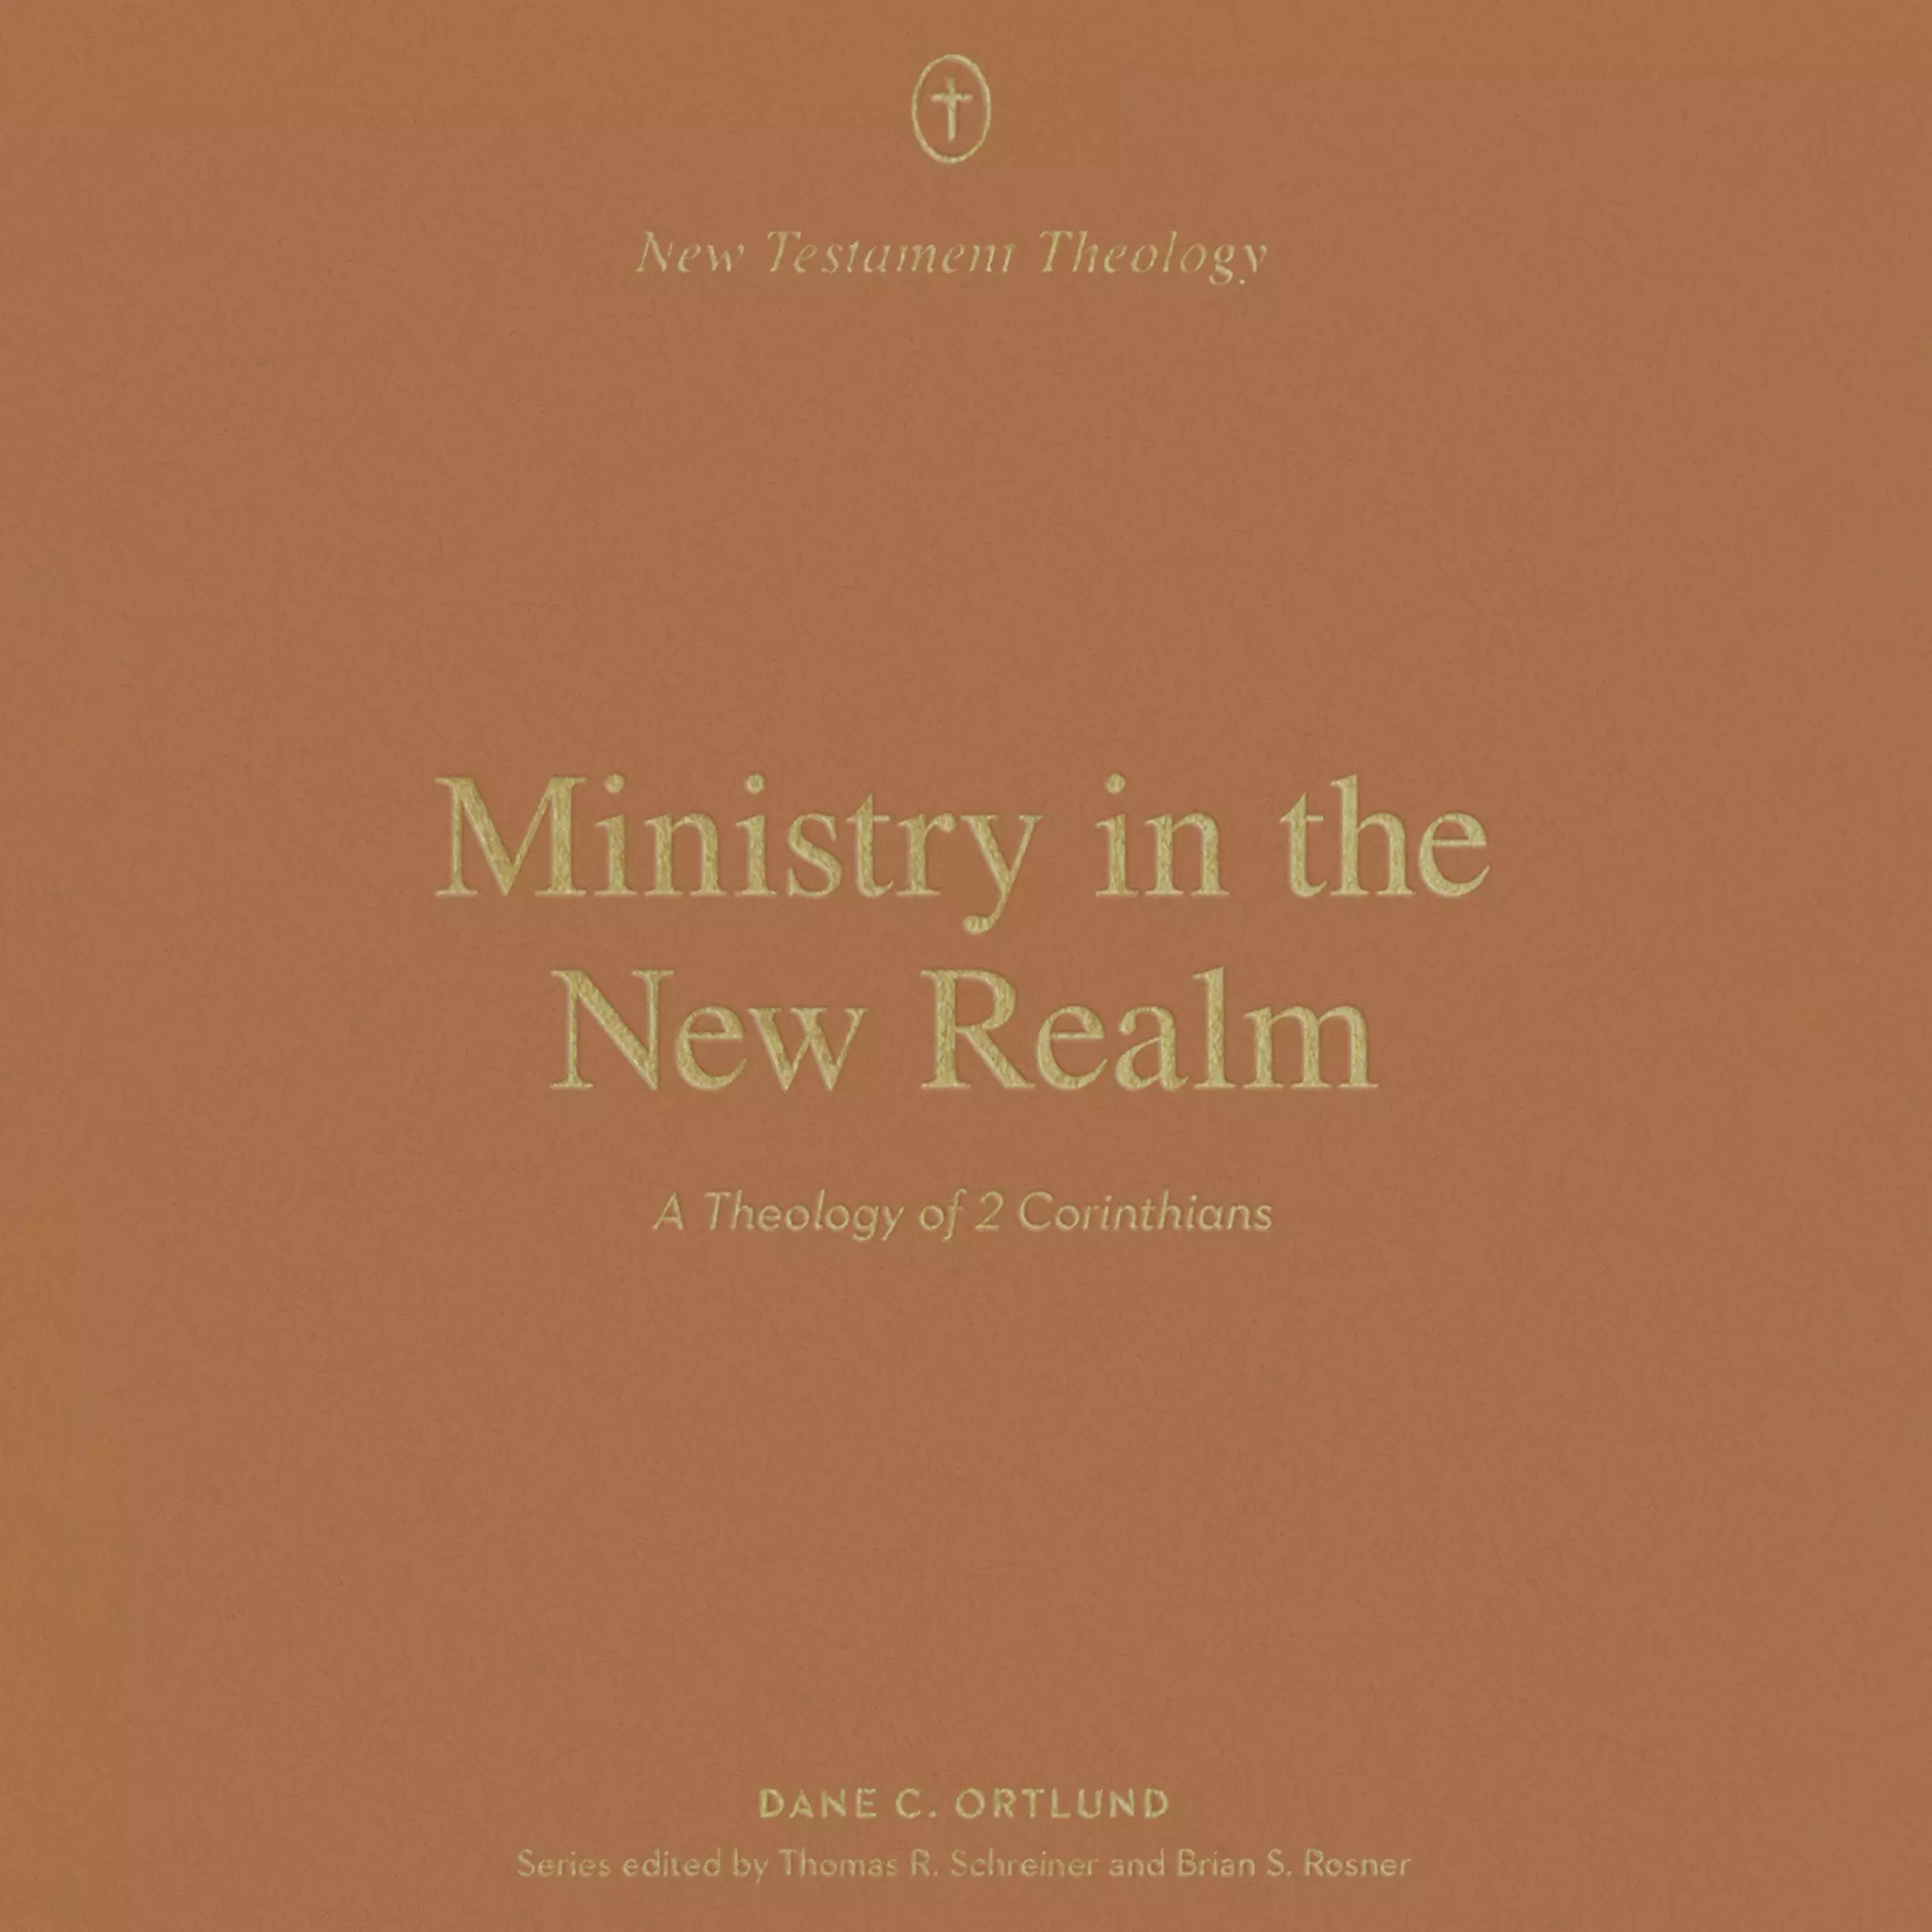 Ministry in the New Realm